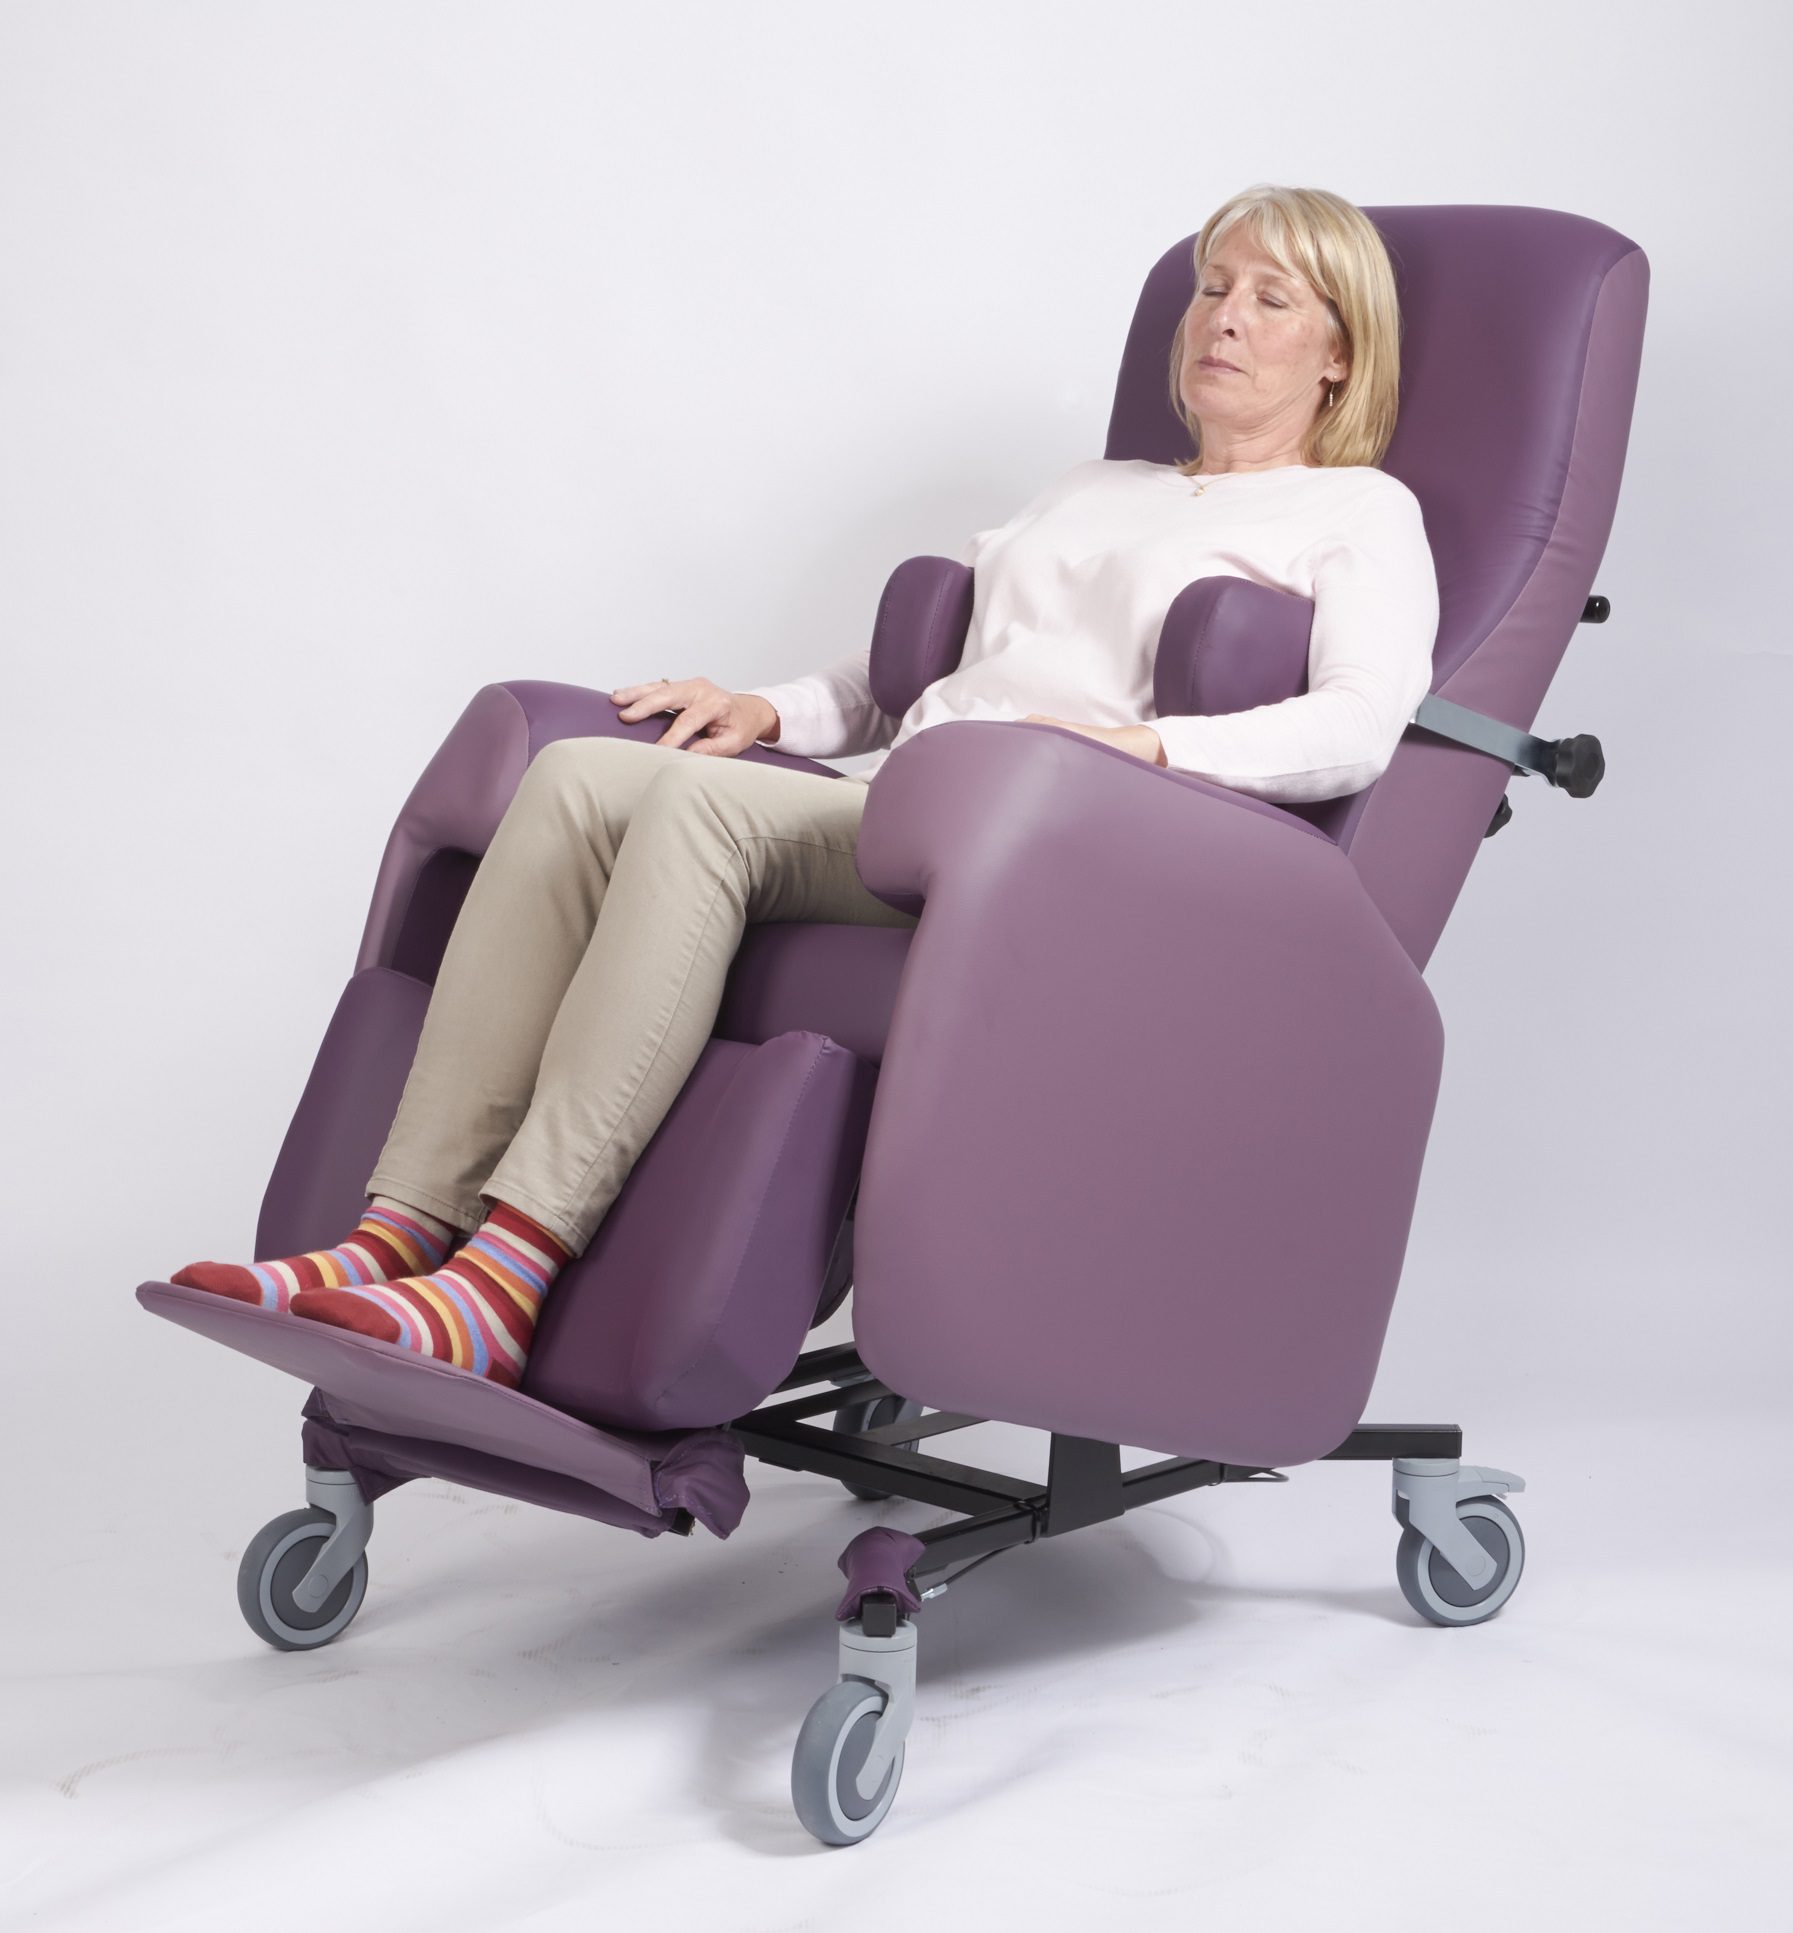 Primacare Florence Level 3 Care Chair